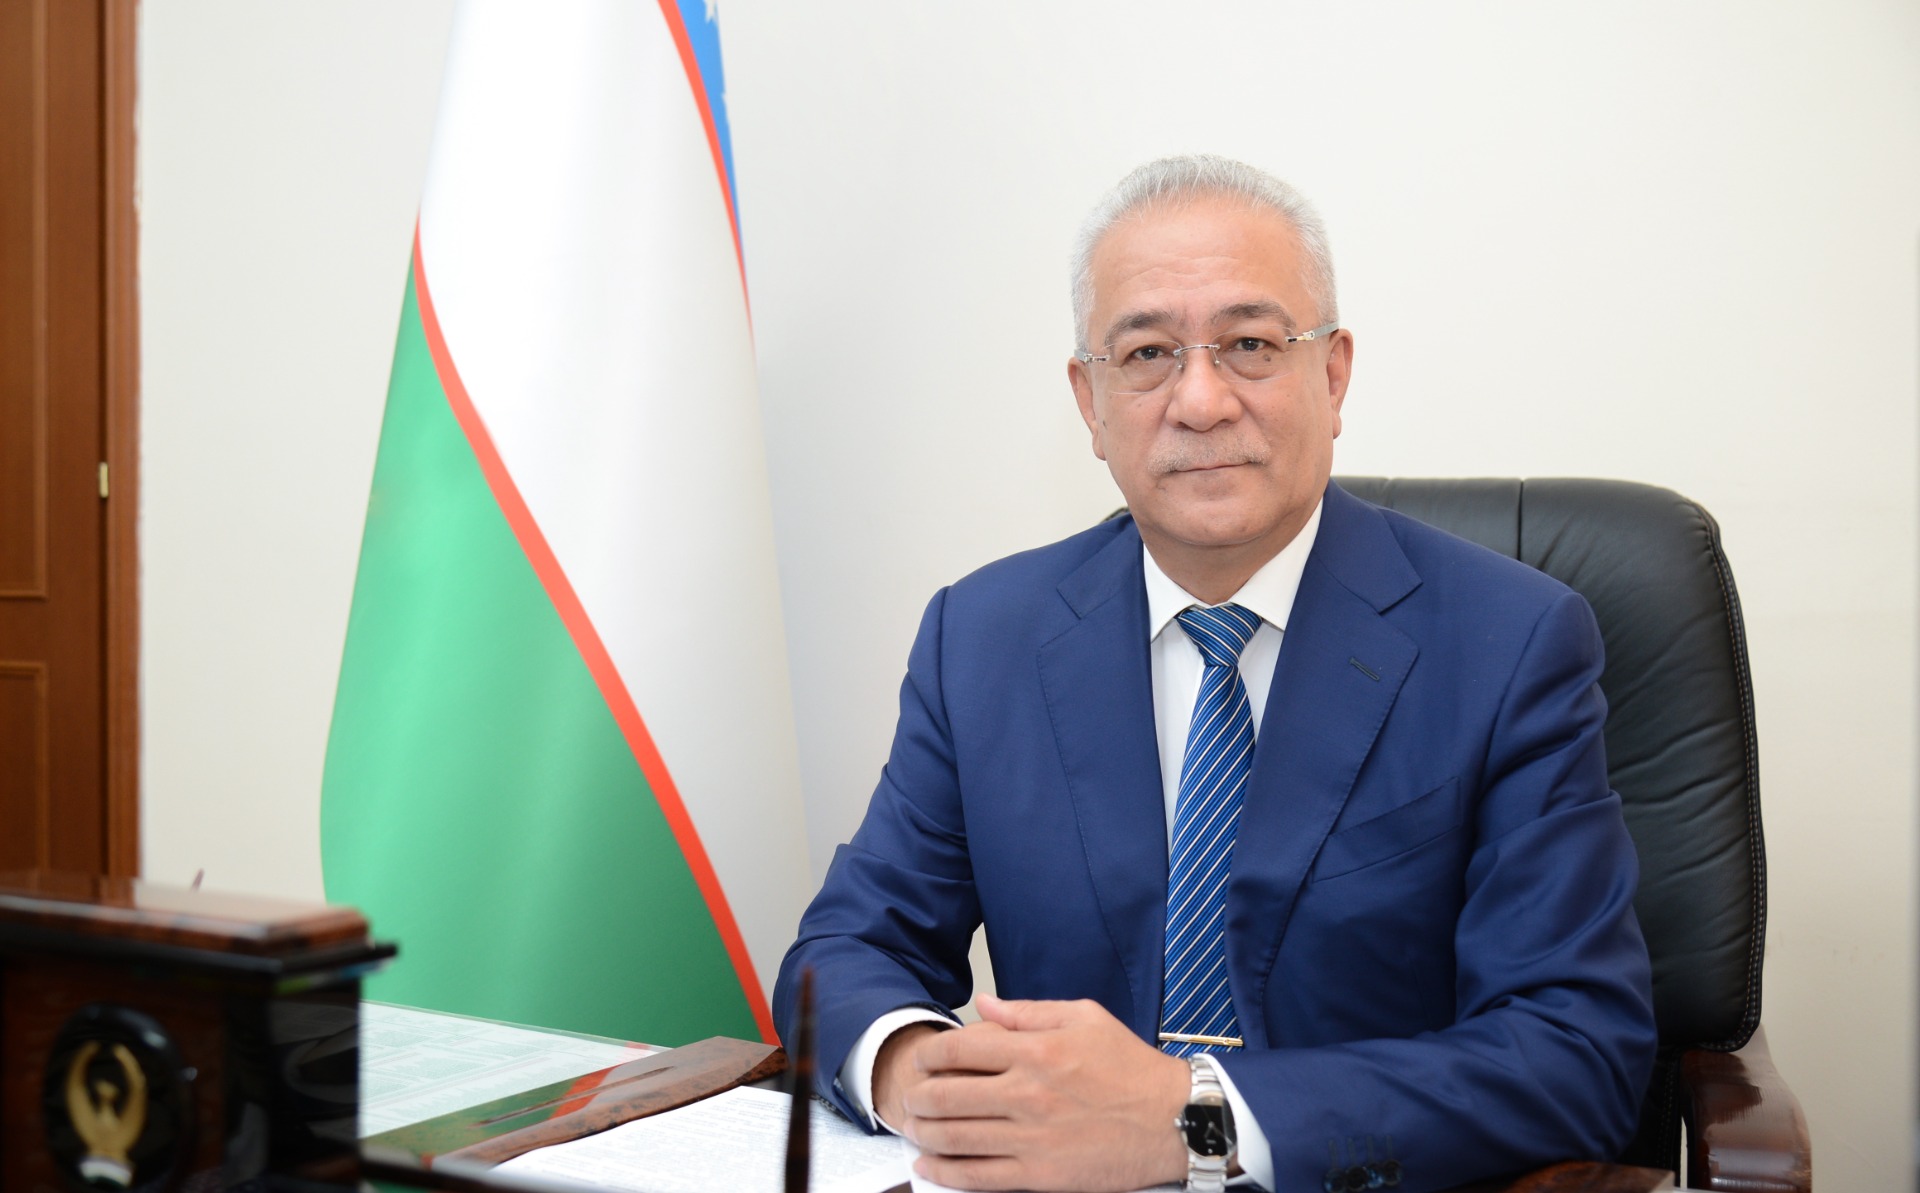 Ismatulla Irgashev, the Special Representative of the President of the Republic of Uzbekistan for Afghanistan,